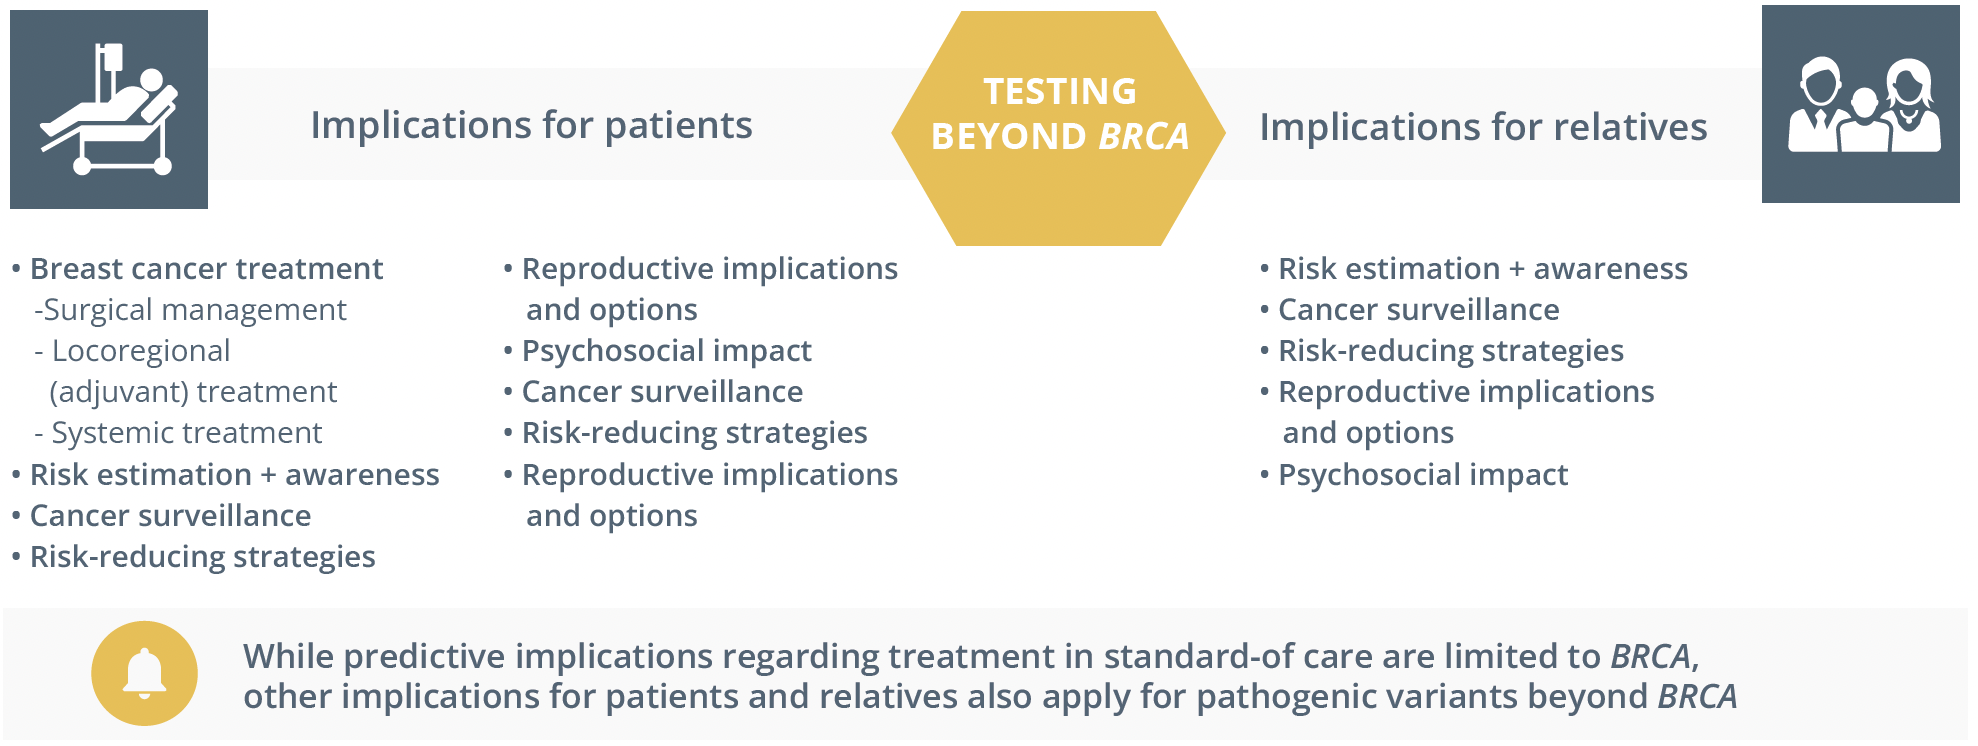 The implications for both patients and their relatives for pathogenic variants beyond BRCA.